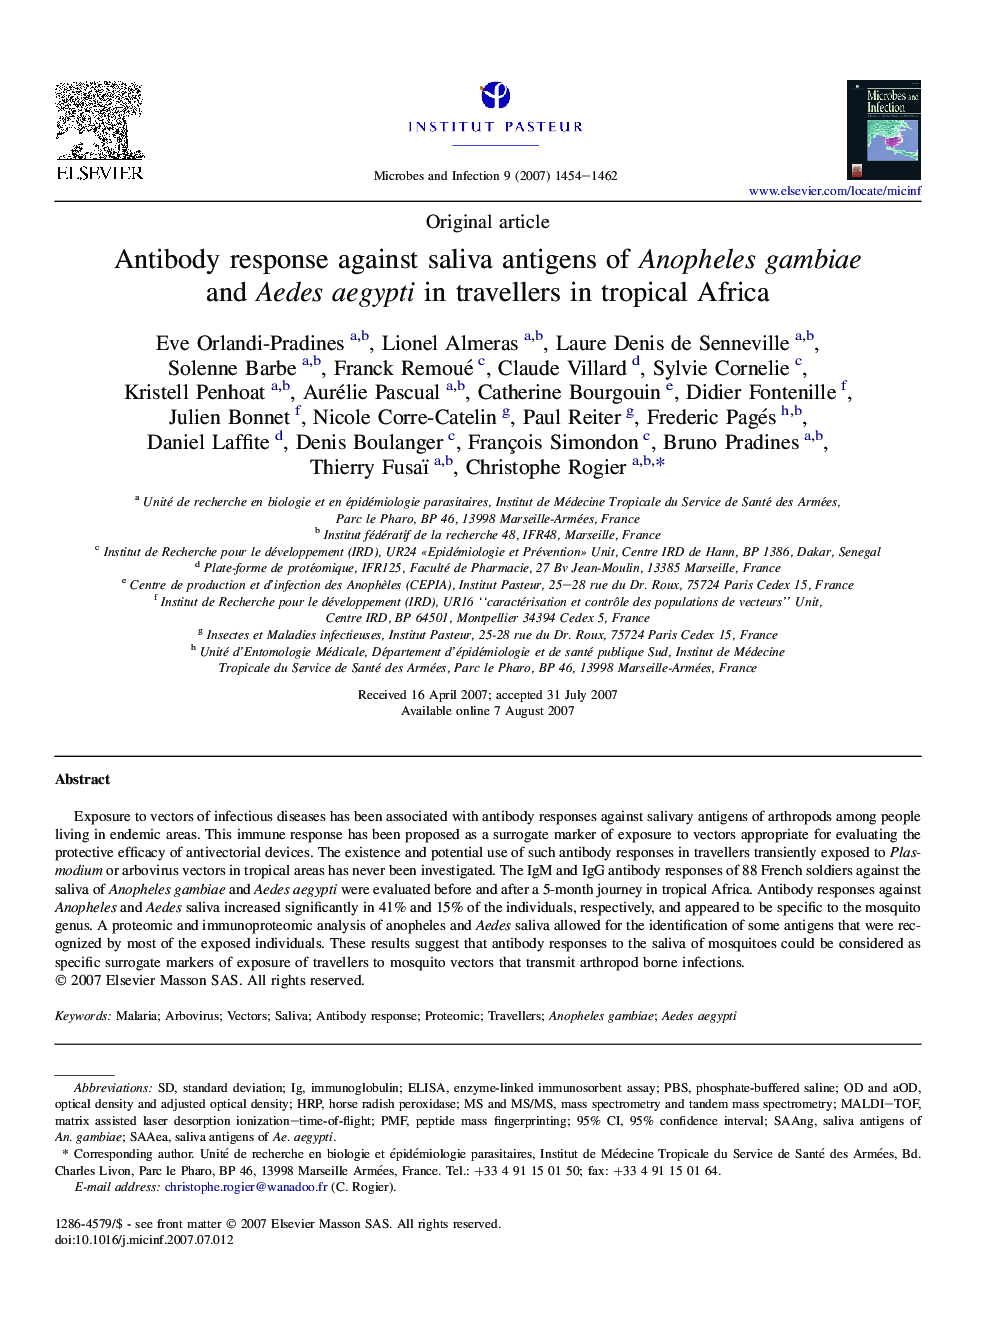 Antibody response against saliva antigens of Anopheles gambiae and Aedes aegypti in travellers in tropical Africa